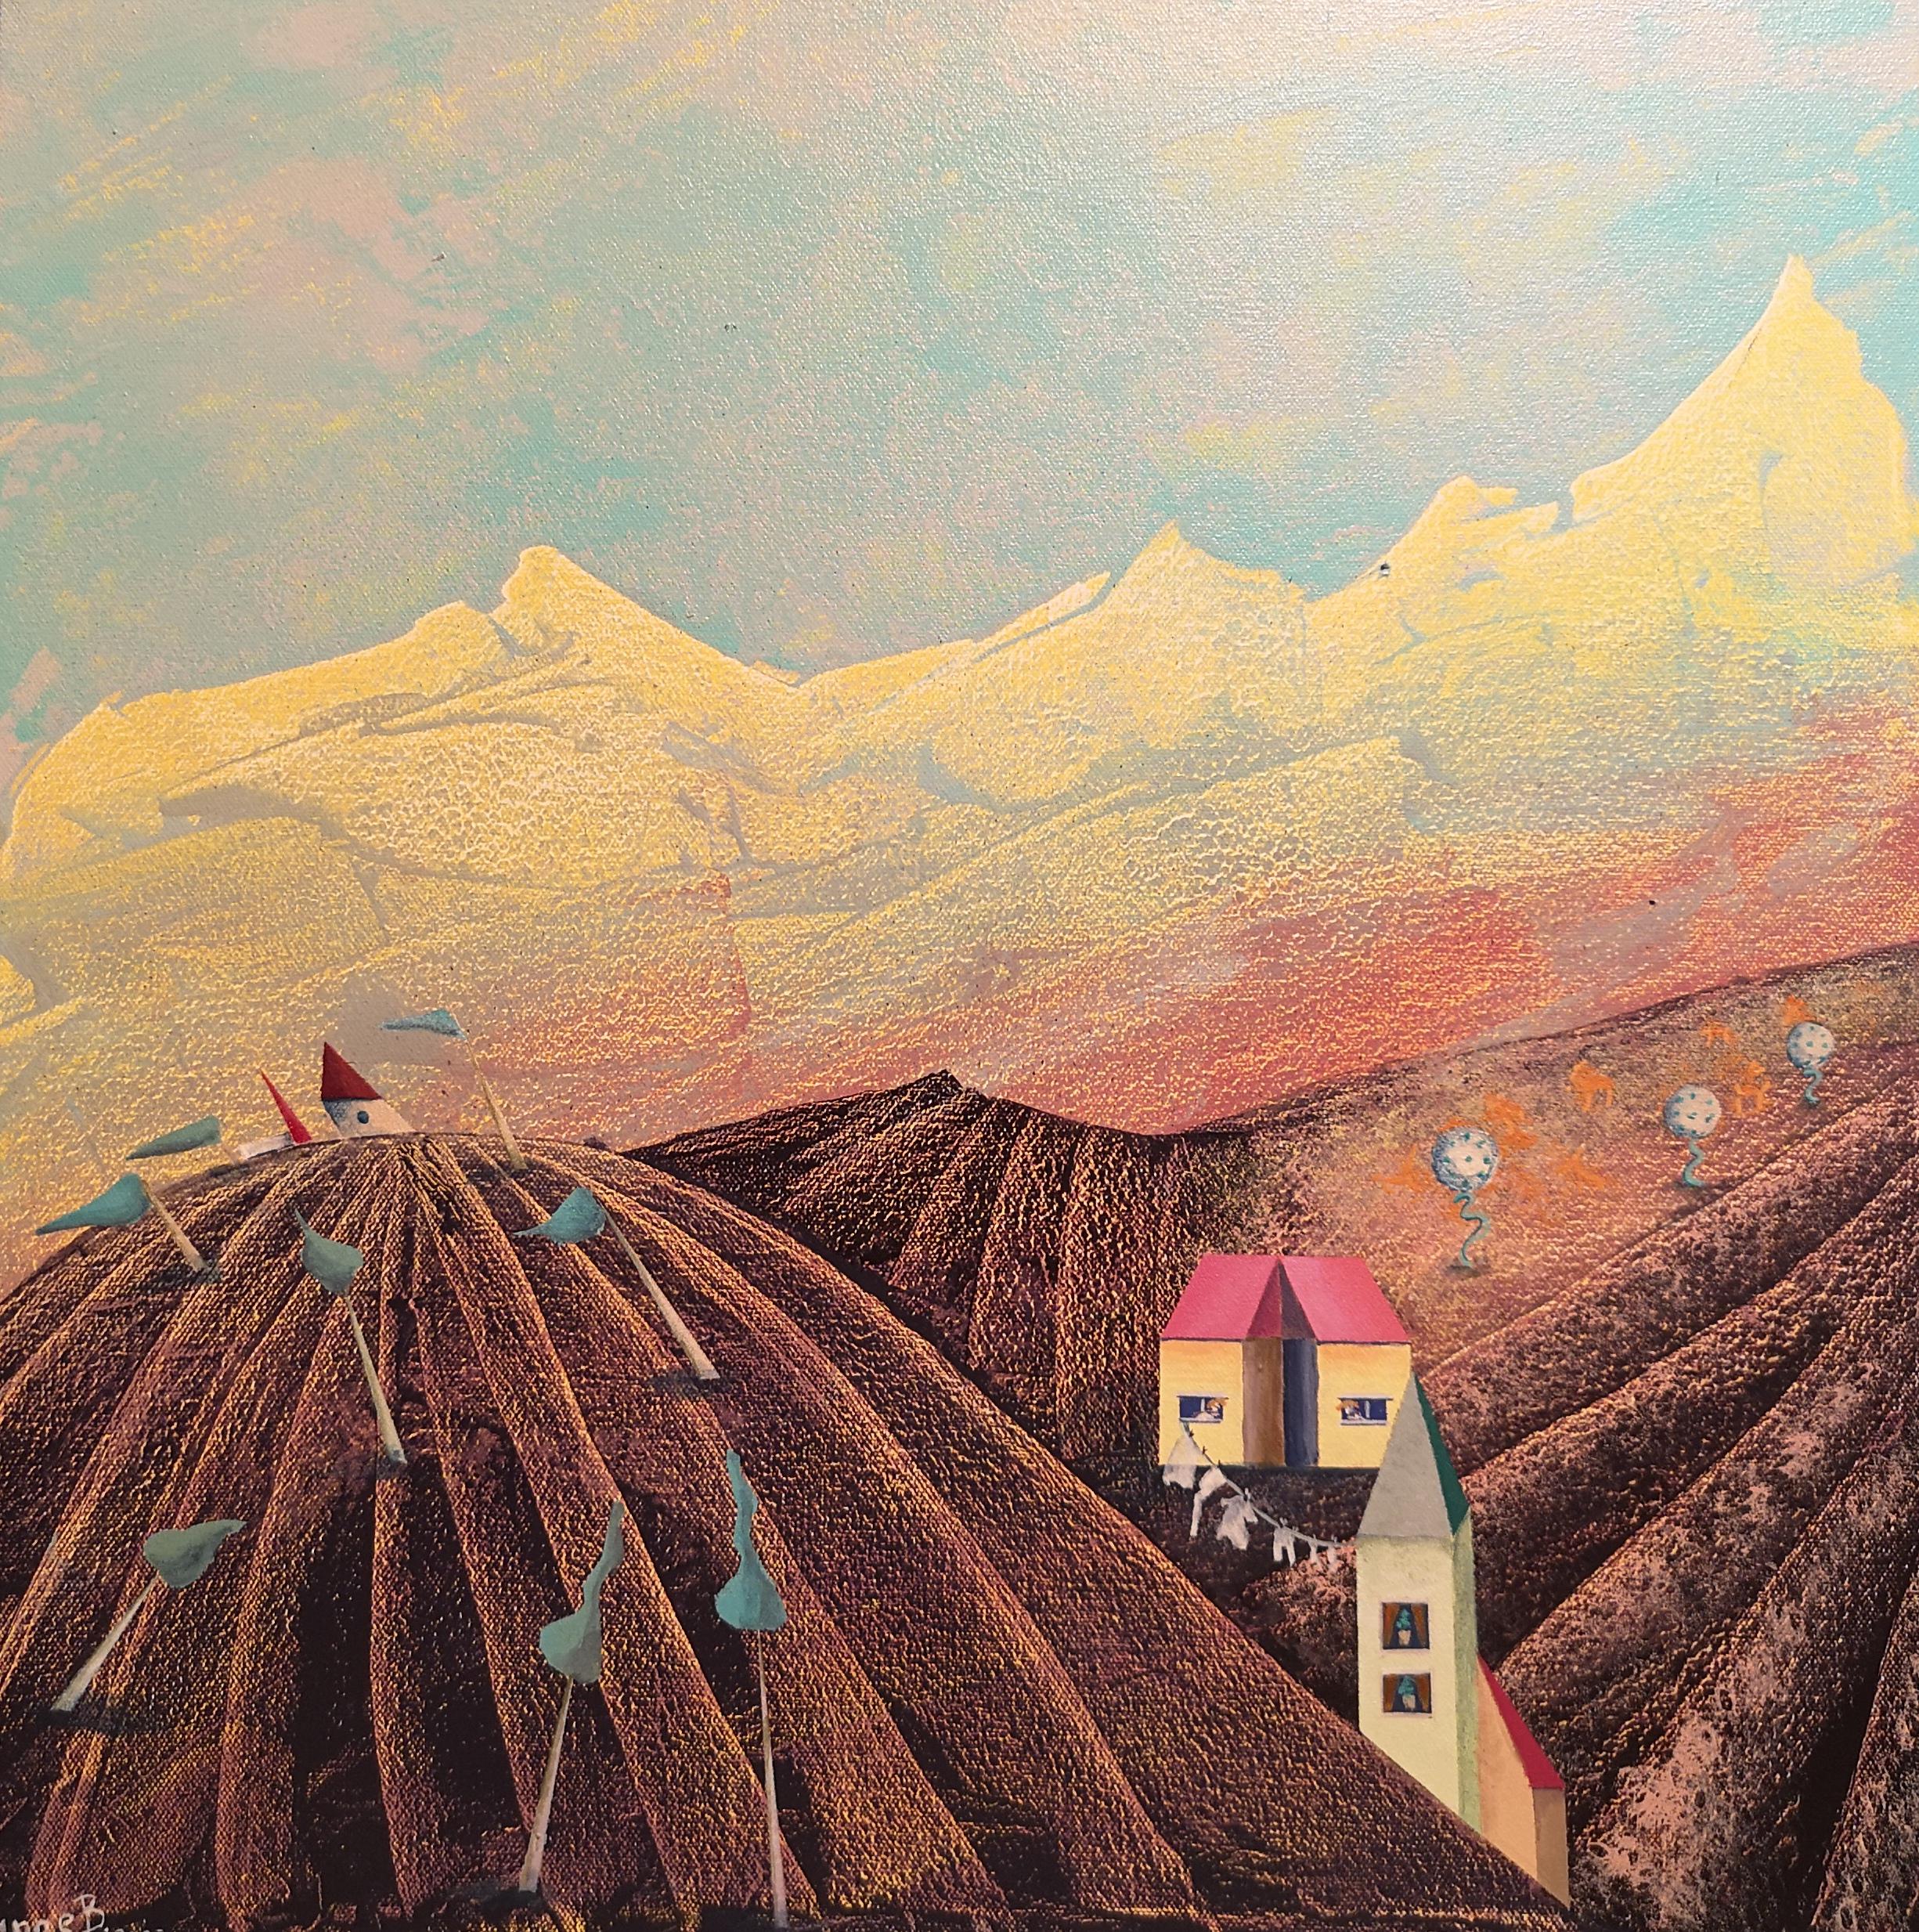 Wind in the mountains - Painting by Sanne Bleka